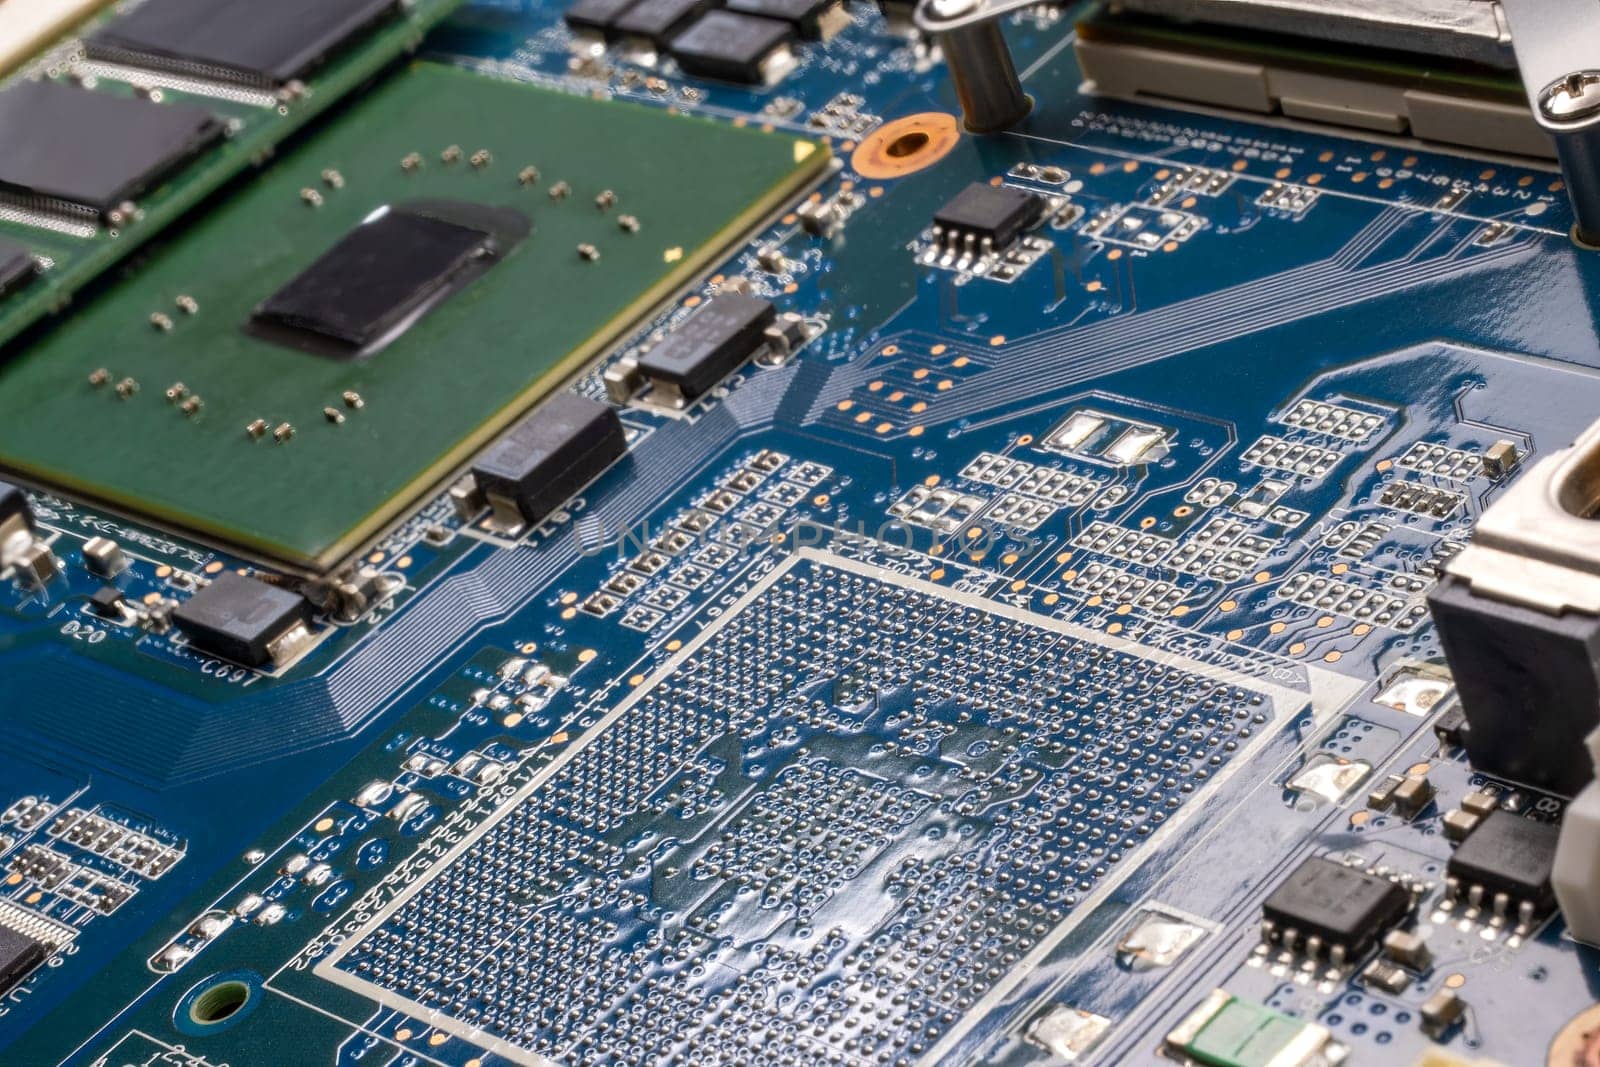 Concept laptop technology. A detailed shot of a computer motherboard, featuring a CPU, chipsets and circuit board showcasing the intricate engineering and composite materials used in its manufacturing. Bluegreen PCB. Selective focus